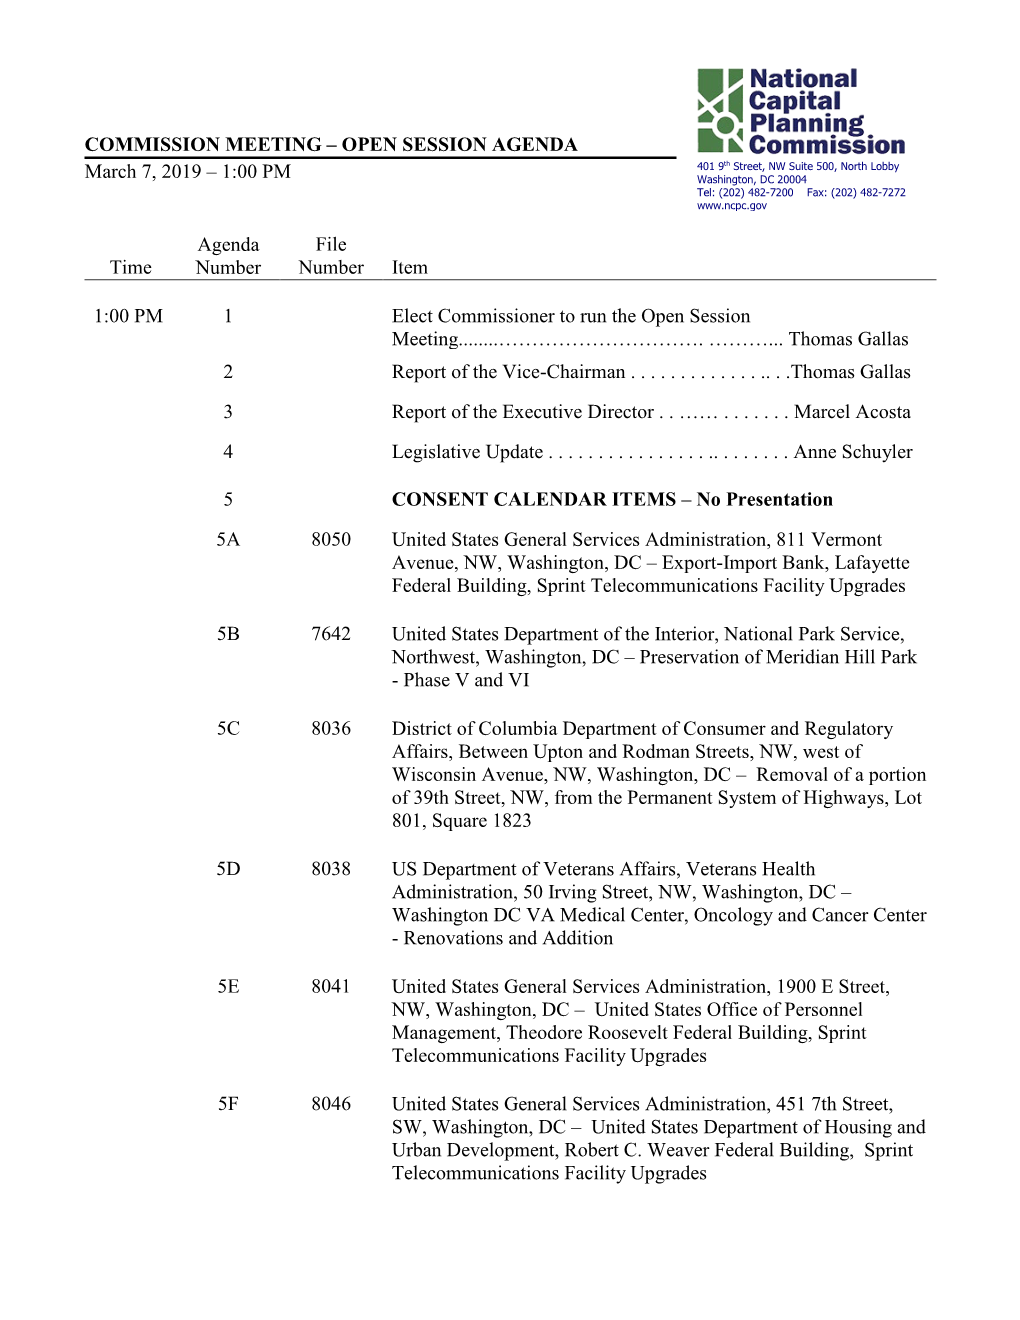 Final Agenda for the March 7, 2019 Commission Meeting